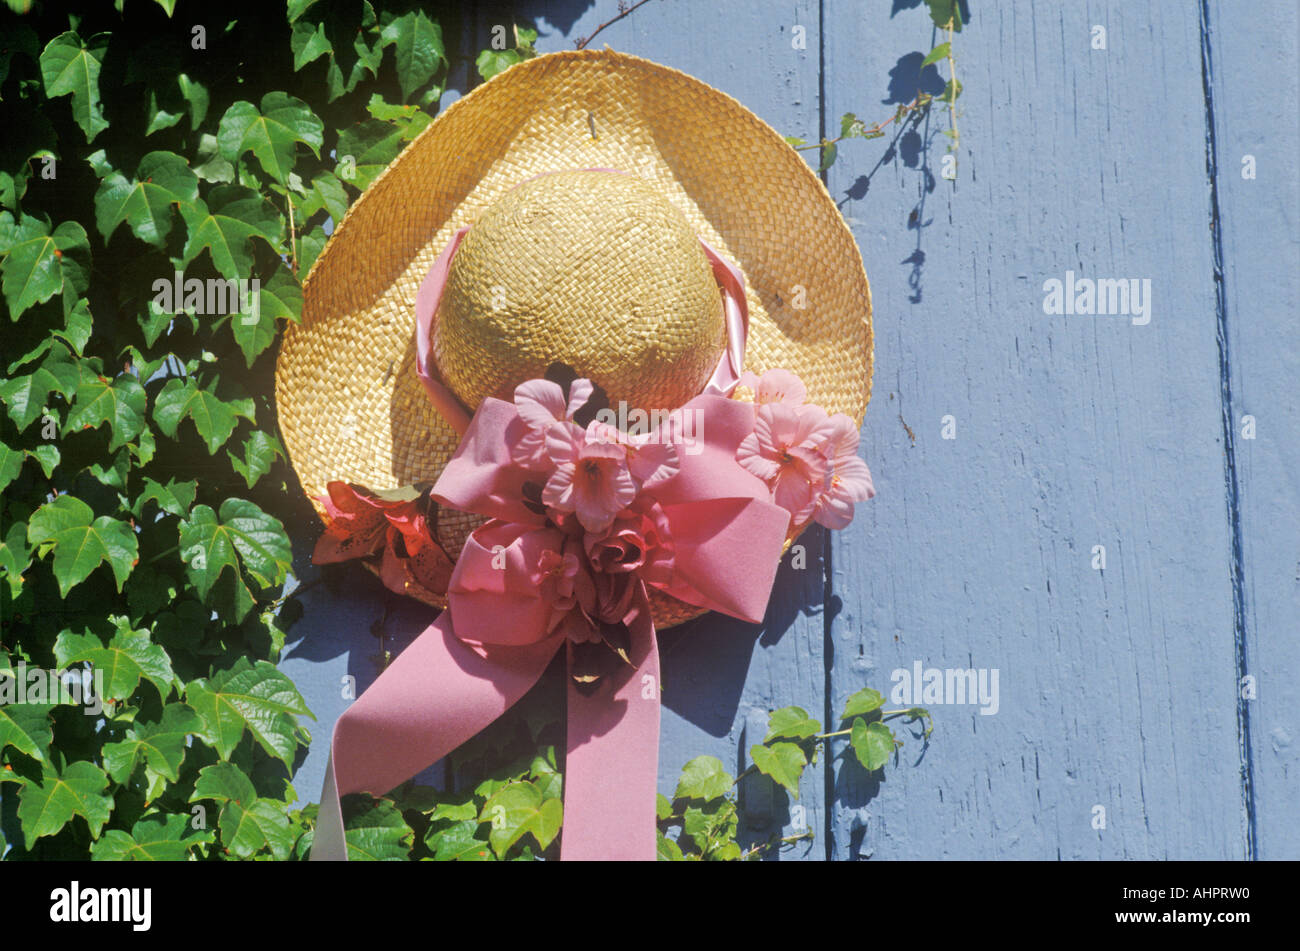 Decorated straw hat nailed onto a door Stock Photo